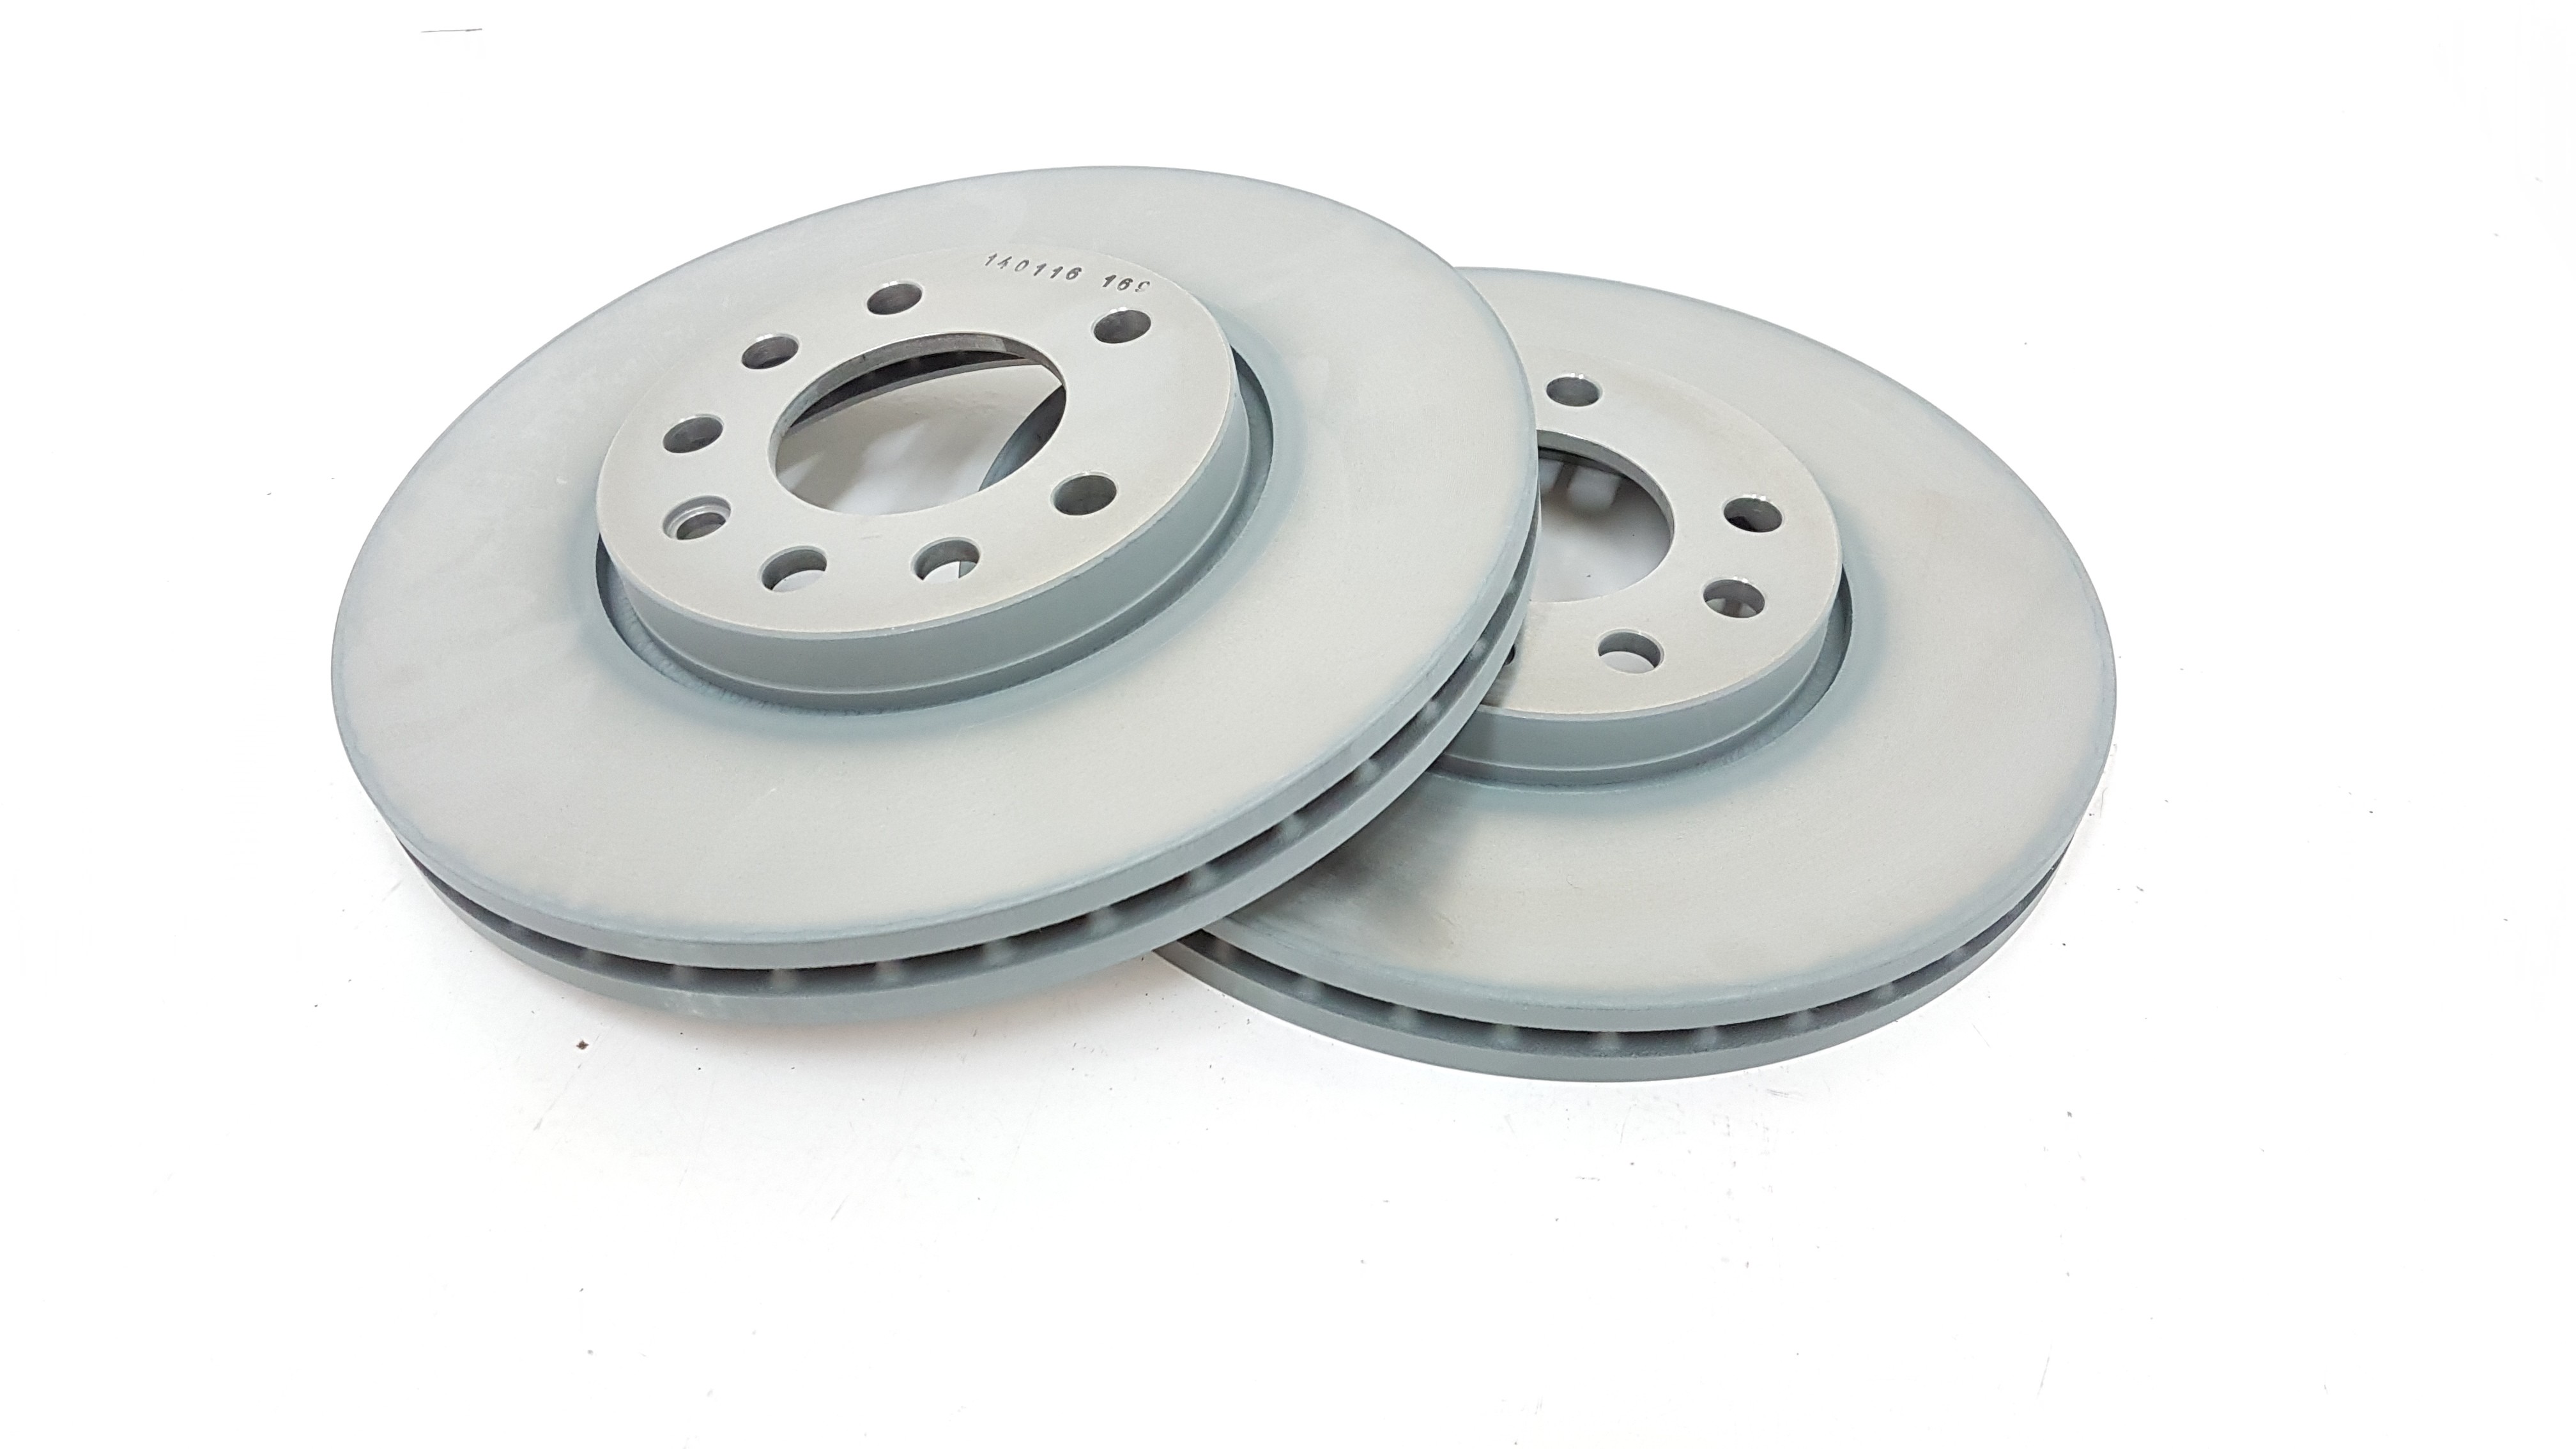 Vauxhall Vectra 1.9 CDTi 01//04-01//04 Dimpled /& Grooved Rear Brake Discs